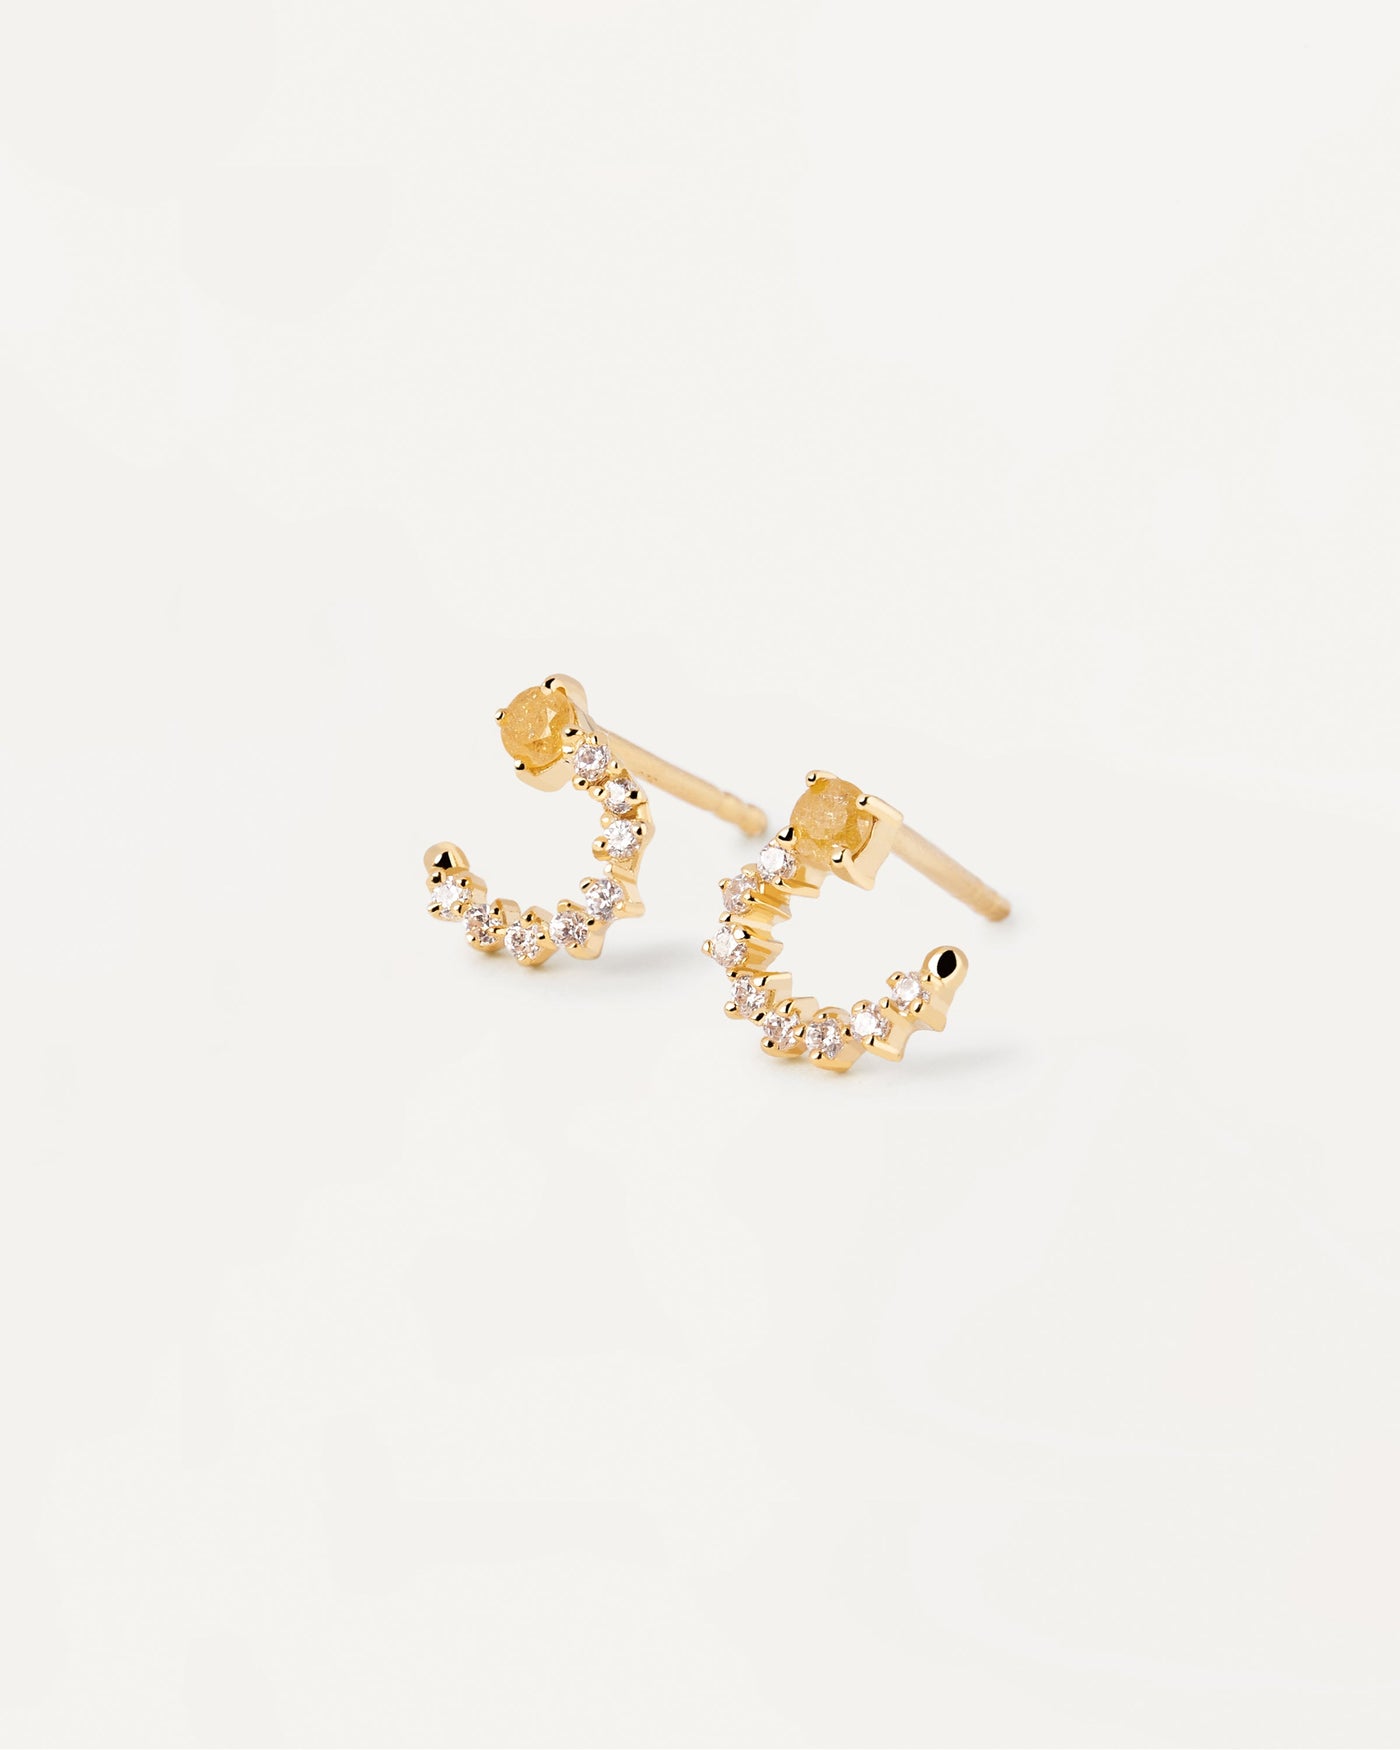 2023 Selection | Villa Earrings. Circle earrings with yellow and white stones. Get the latest arrival from PDPAOLA. Place your order safely and get this Best Seller. Free Shipping.